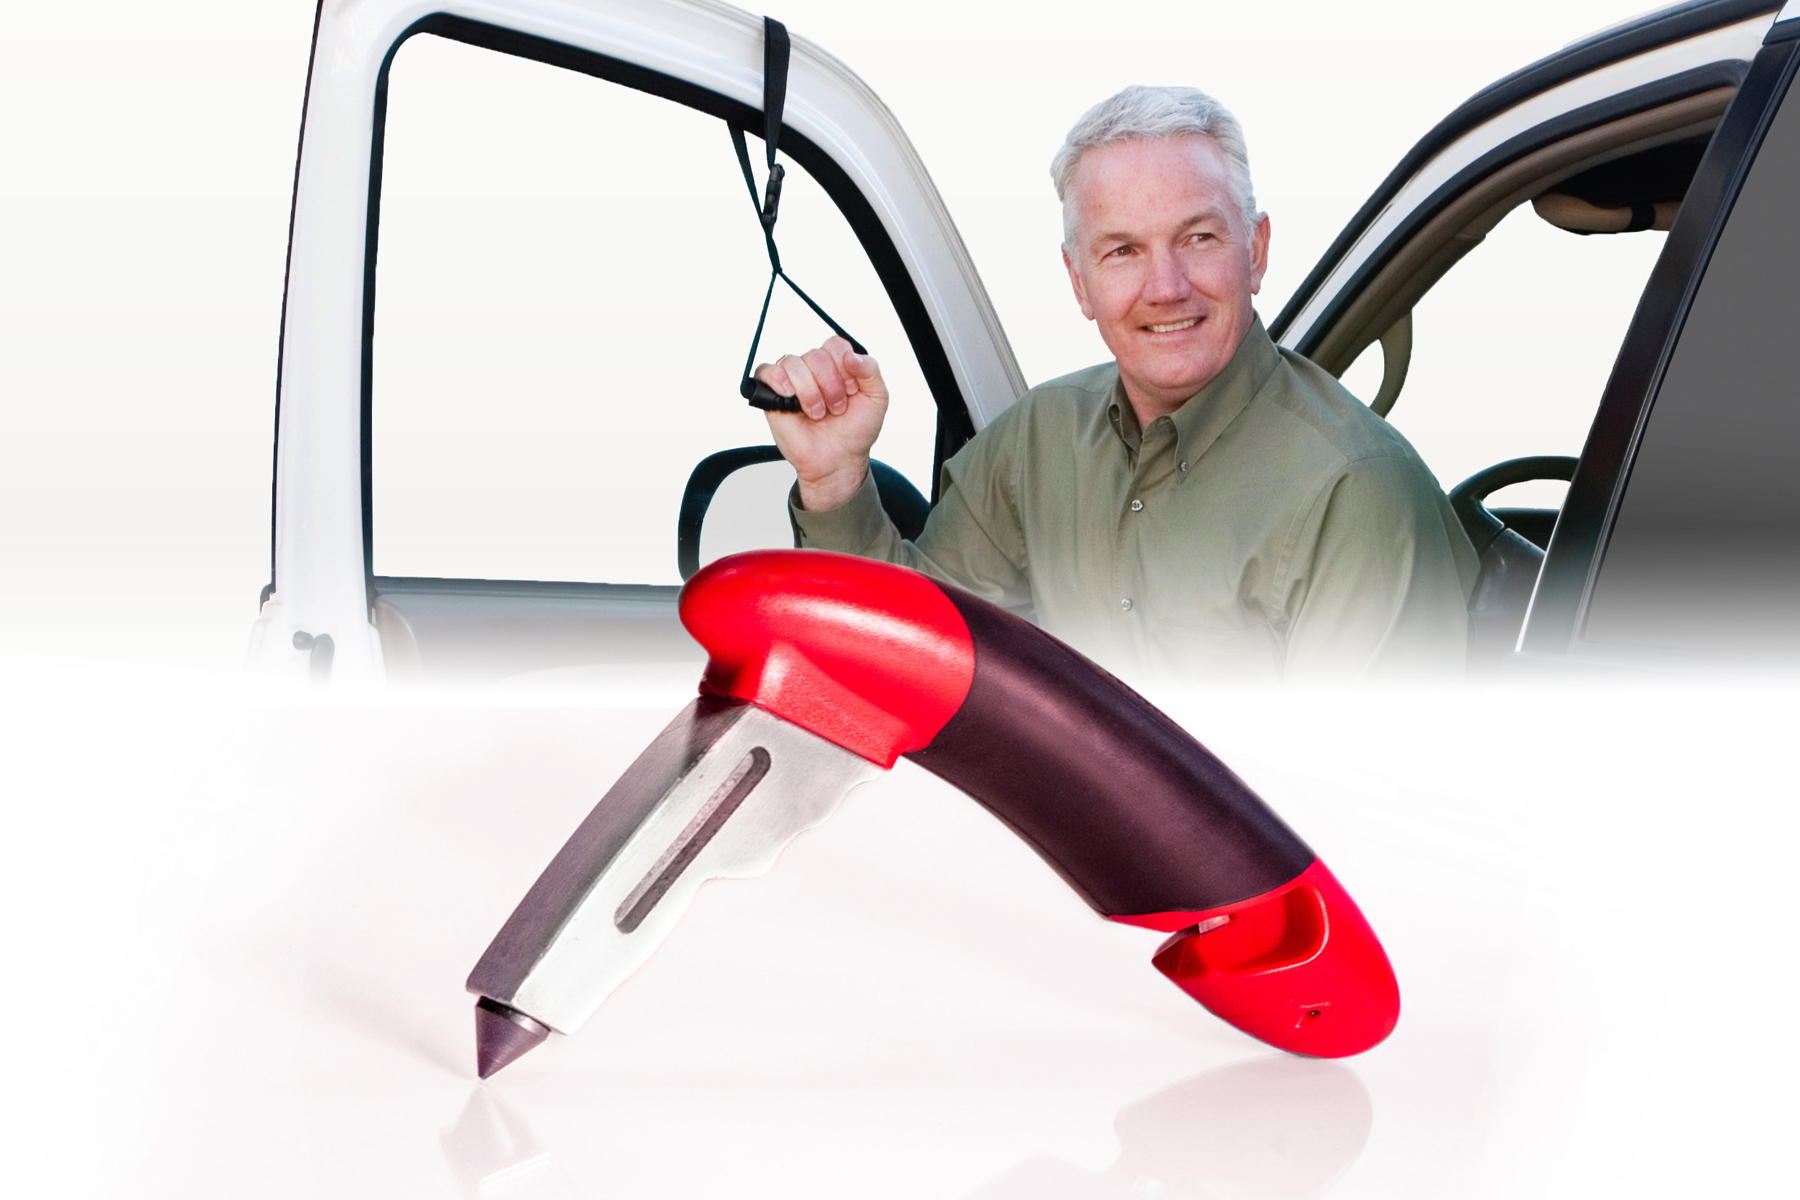 Auto Mobility Combo Pack - HandyBar and Swivel Seat Cushion